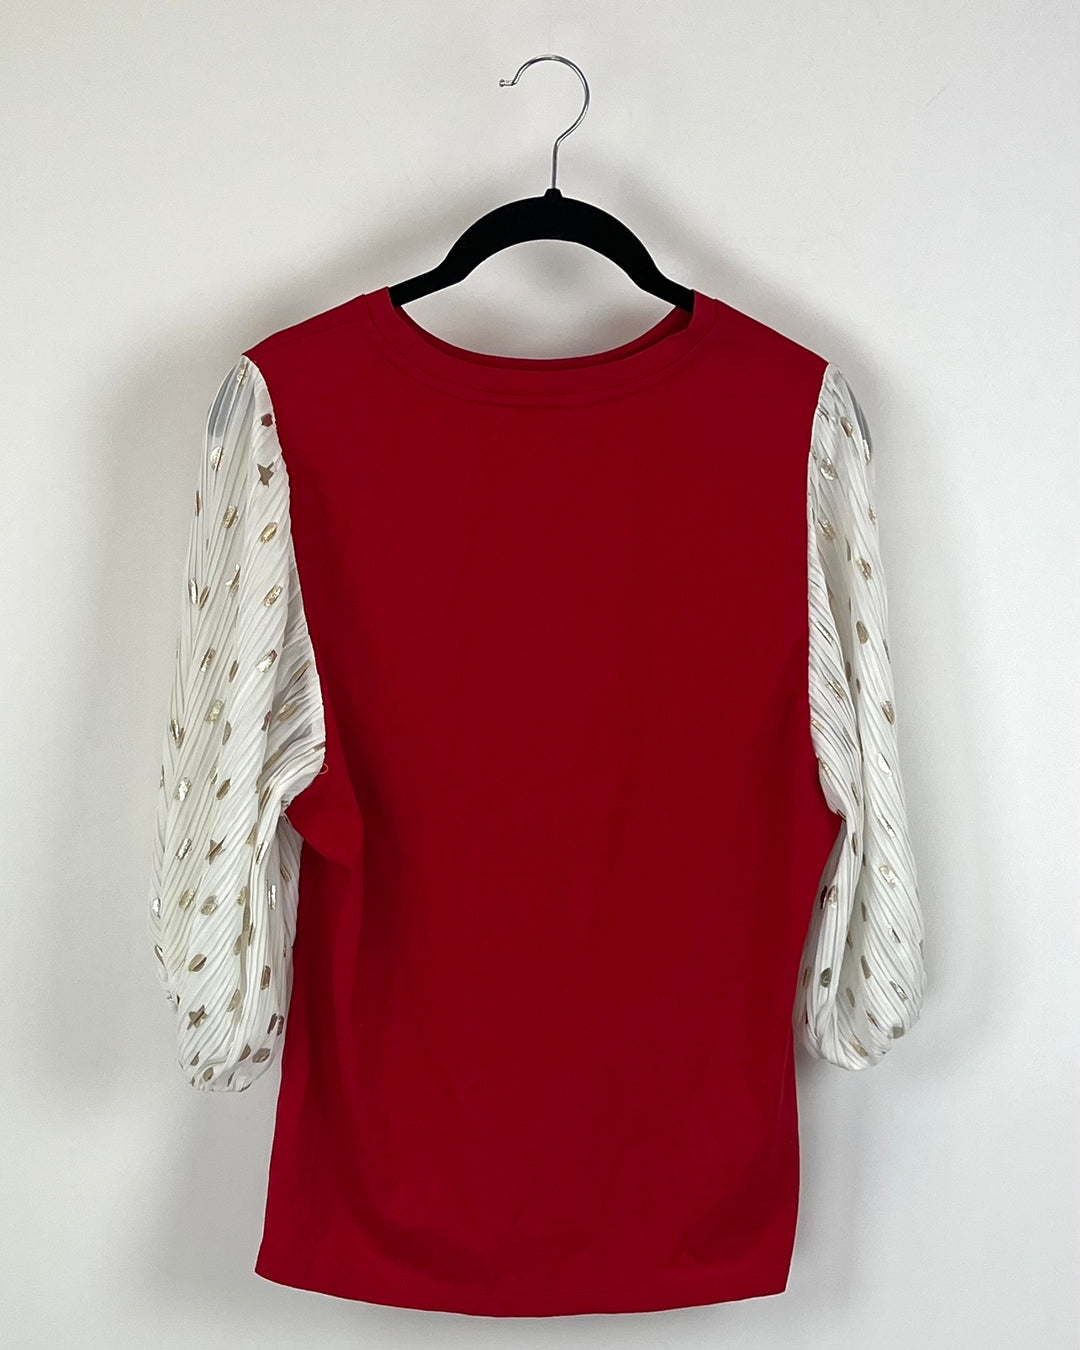 Red Top With White Cropped Sleeves - Size 2-4